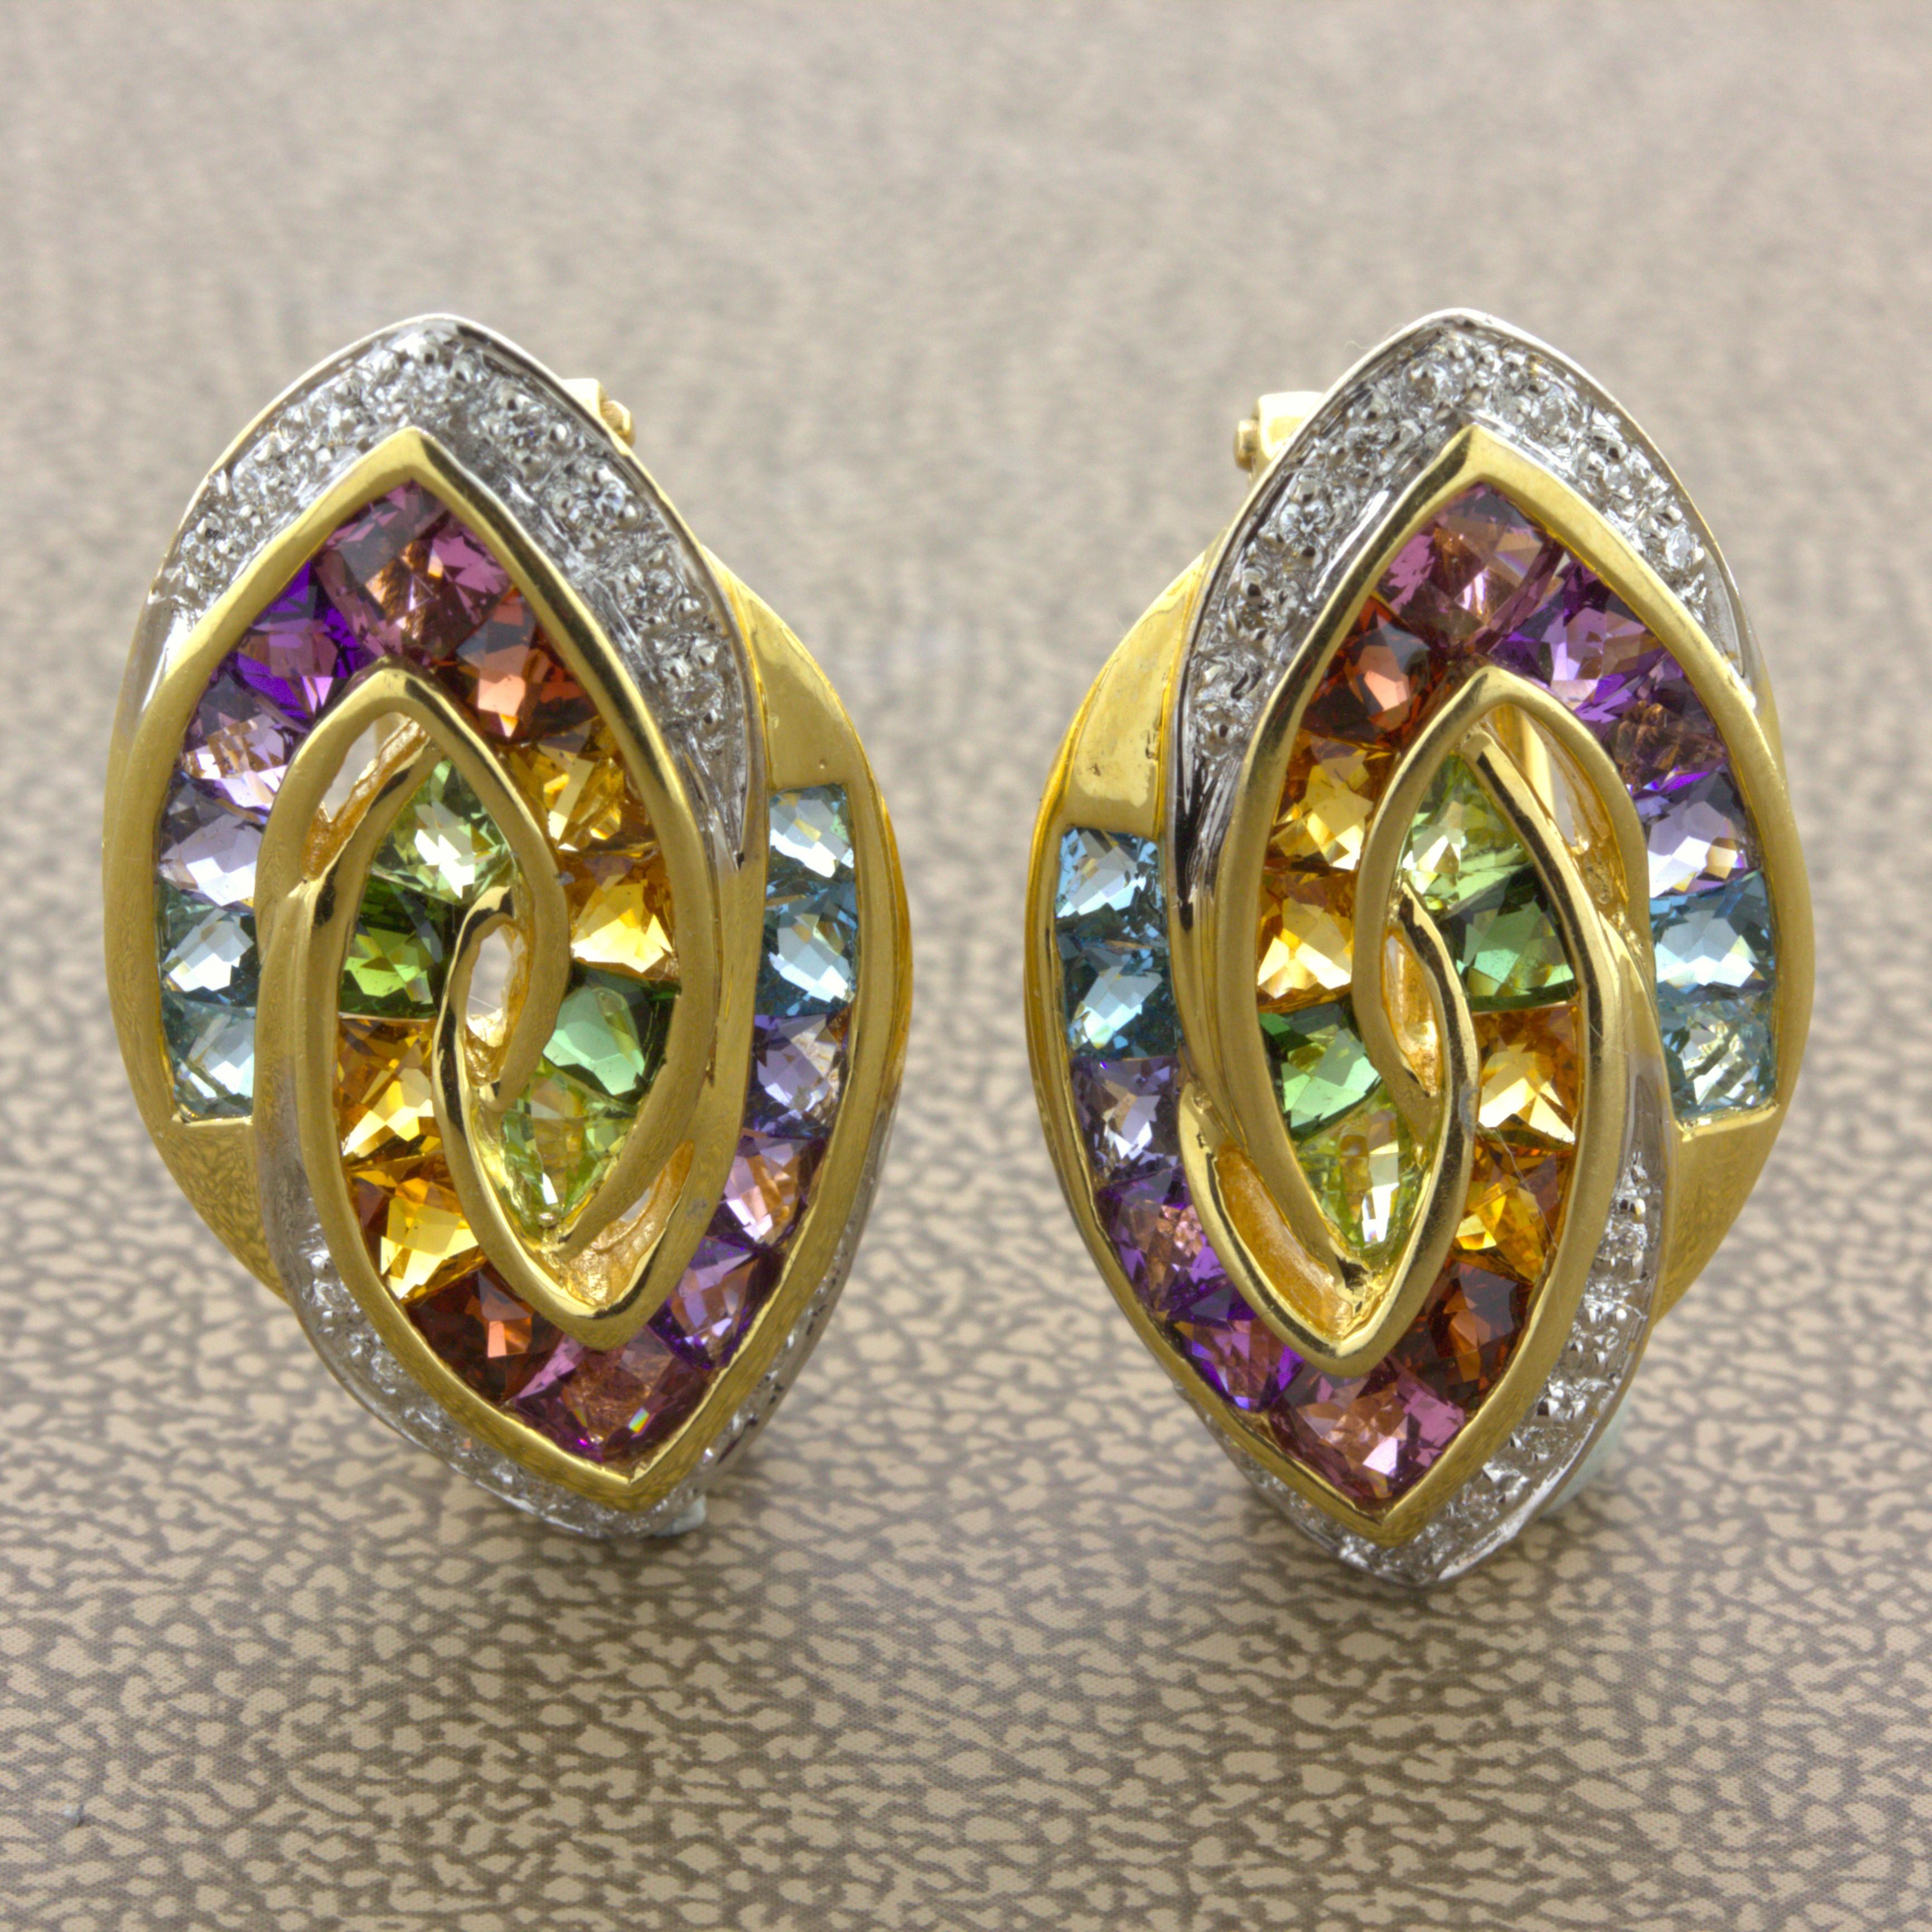 A bright and colorful pair of original Bellarri earrings! They feature 4.51 carats of multi-color gemstones that are channel-set in 18k yellow gold. The gemstones include blue topaz, amethyst, peridot, garnet, citrine, and tourmaline! They are